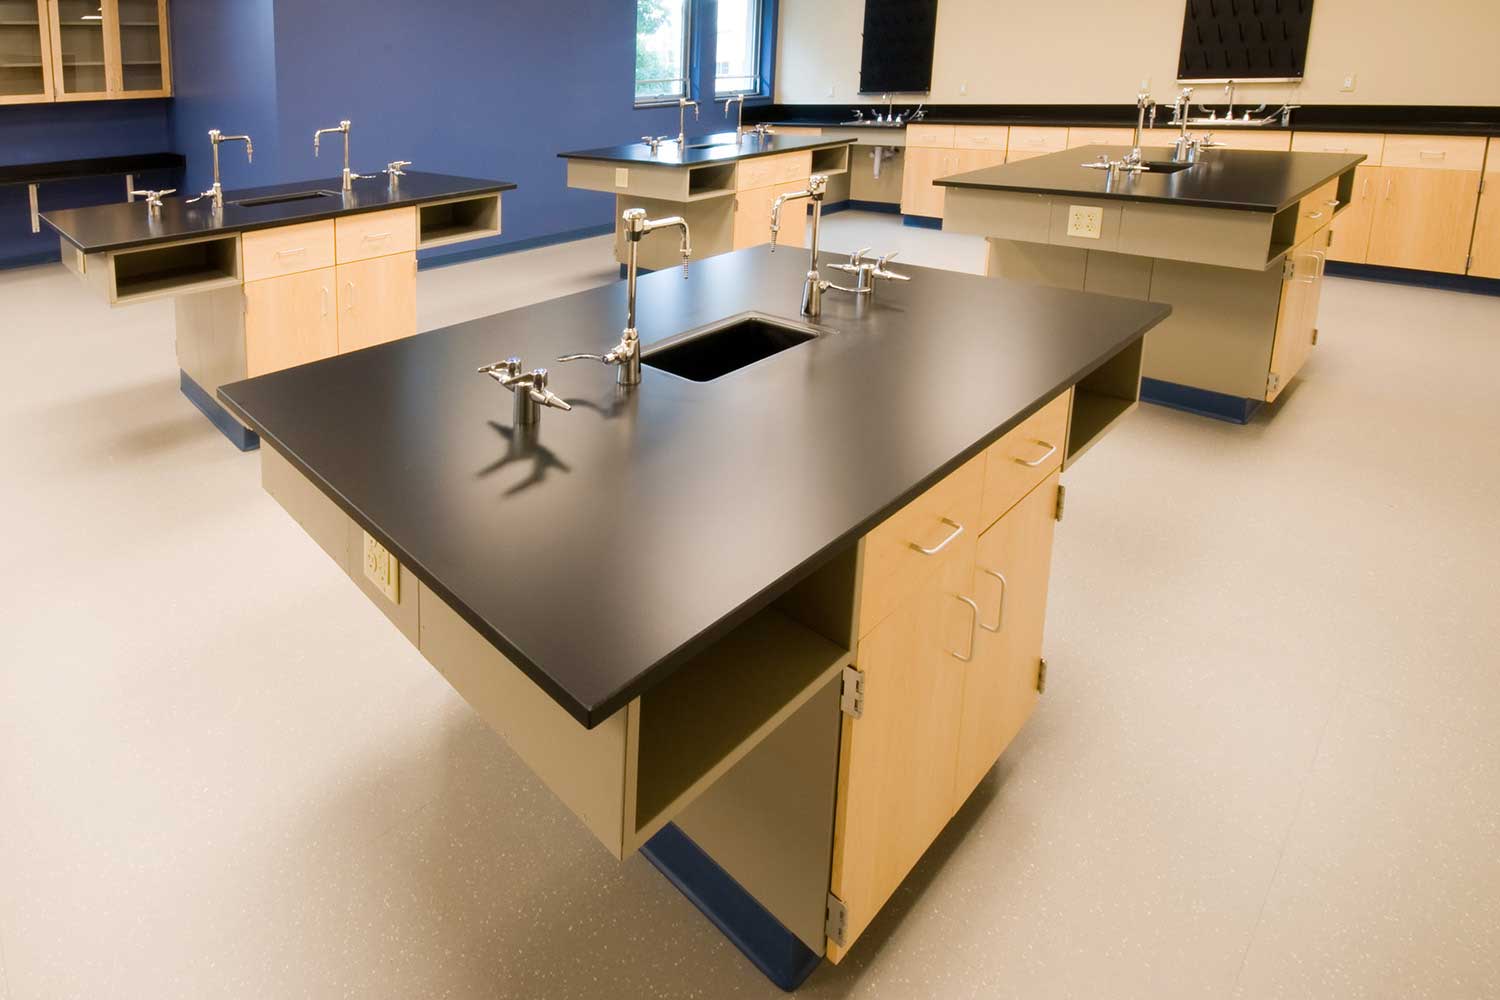 Phenolic Resin Countertops New England Caseworks Options include stone slabs, stone tiles or suspended pebbles. phenolic resin countertops new